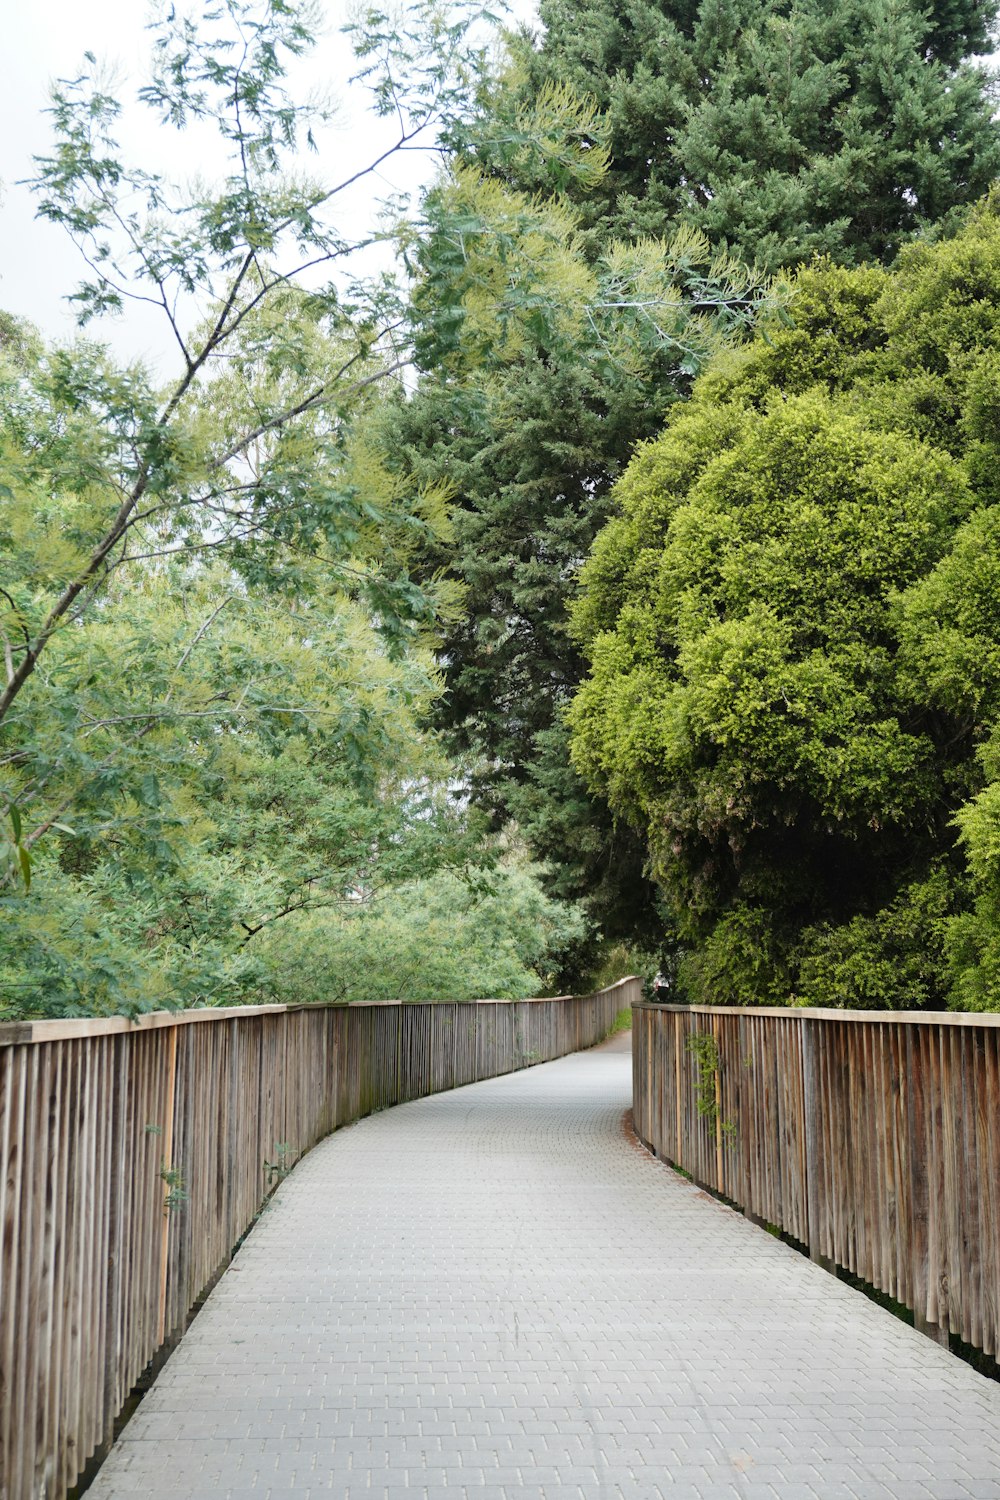 a wooden walkway with a wooden fence and trees in the background